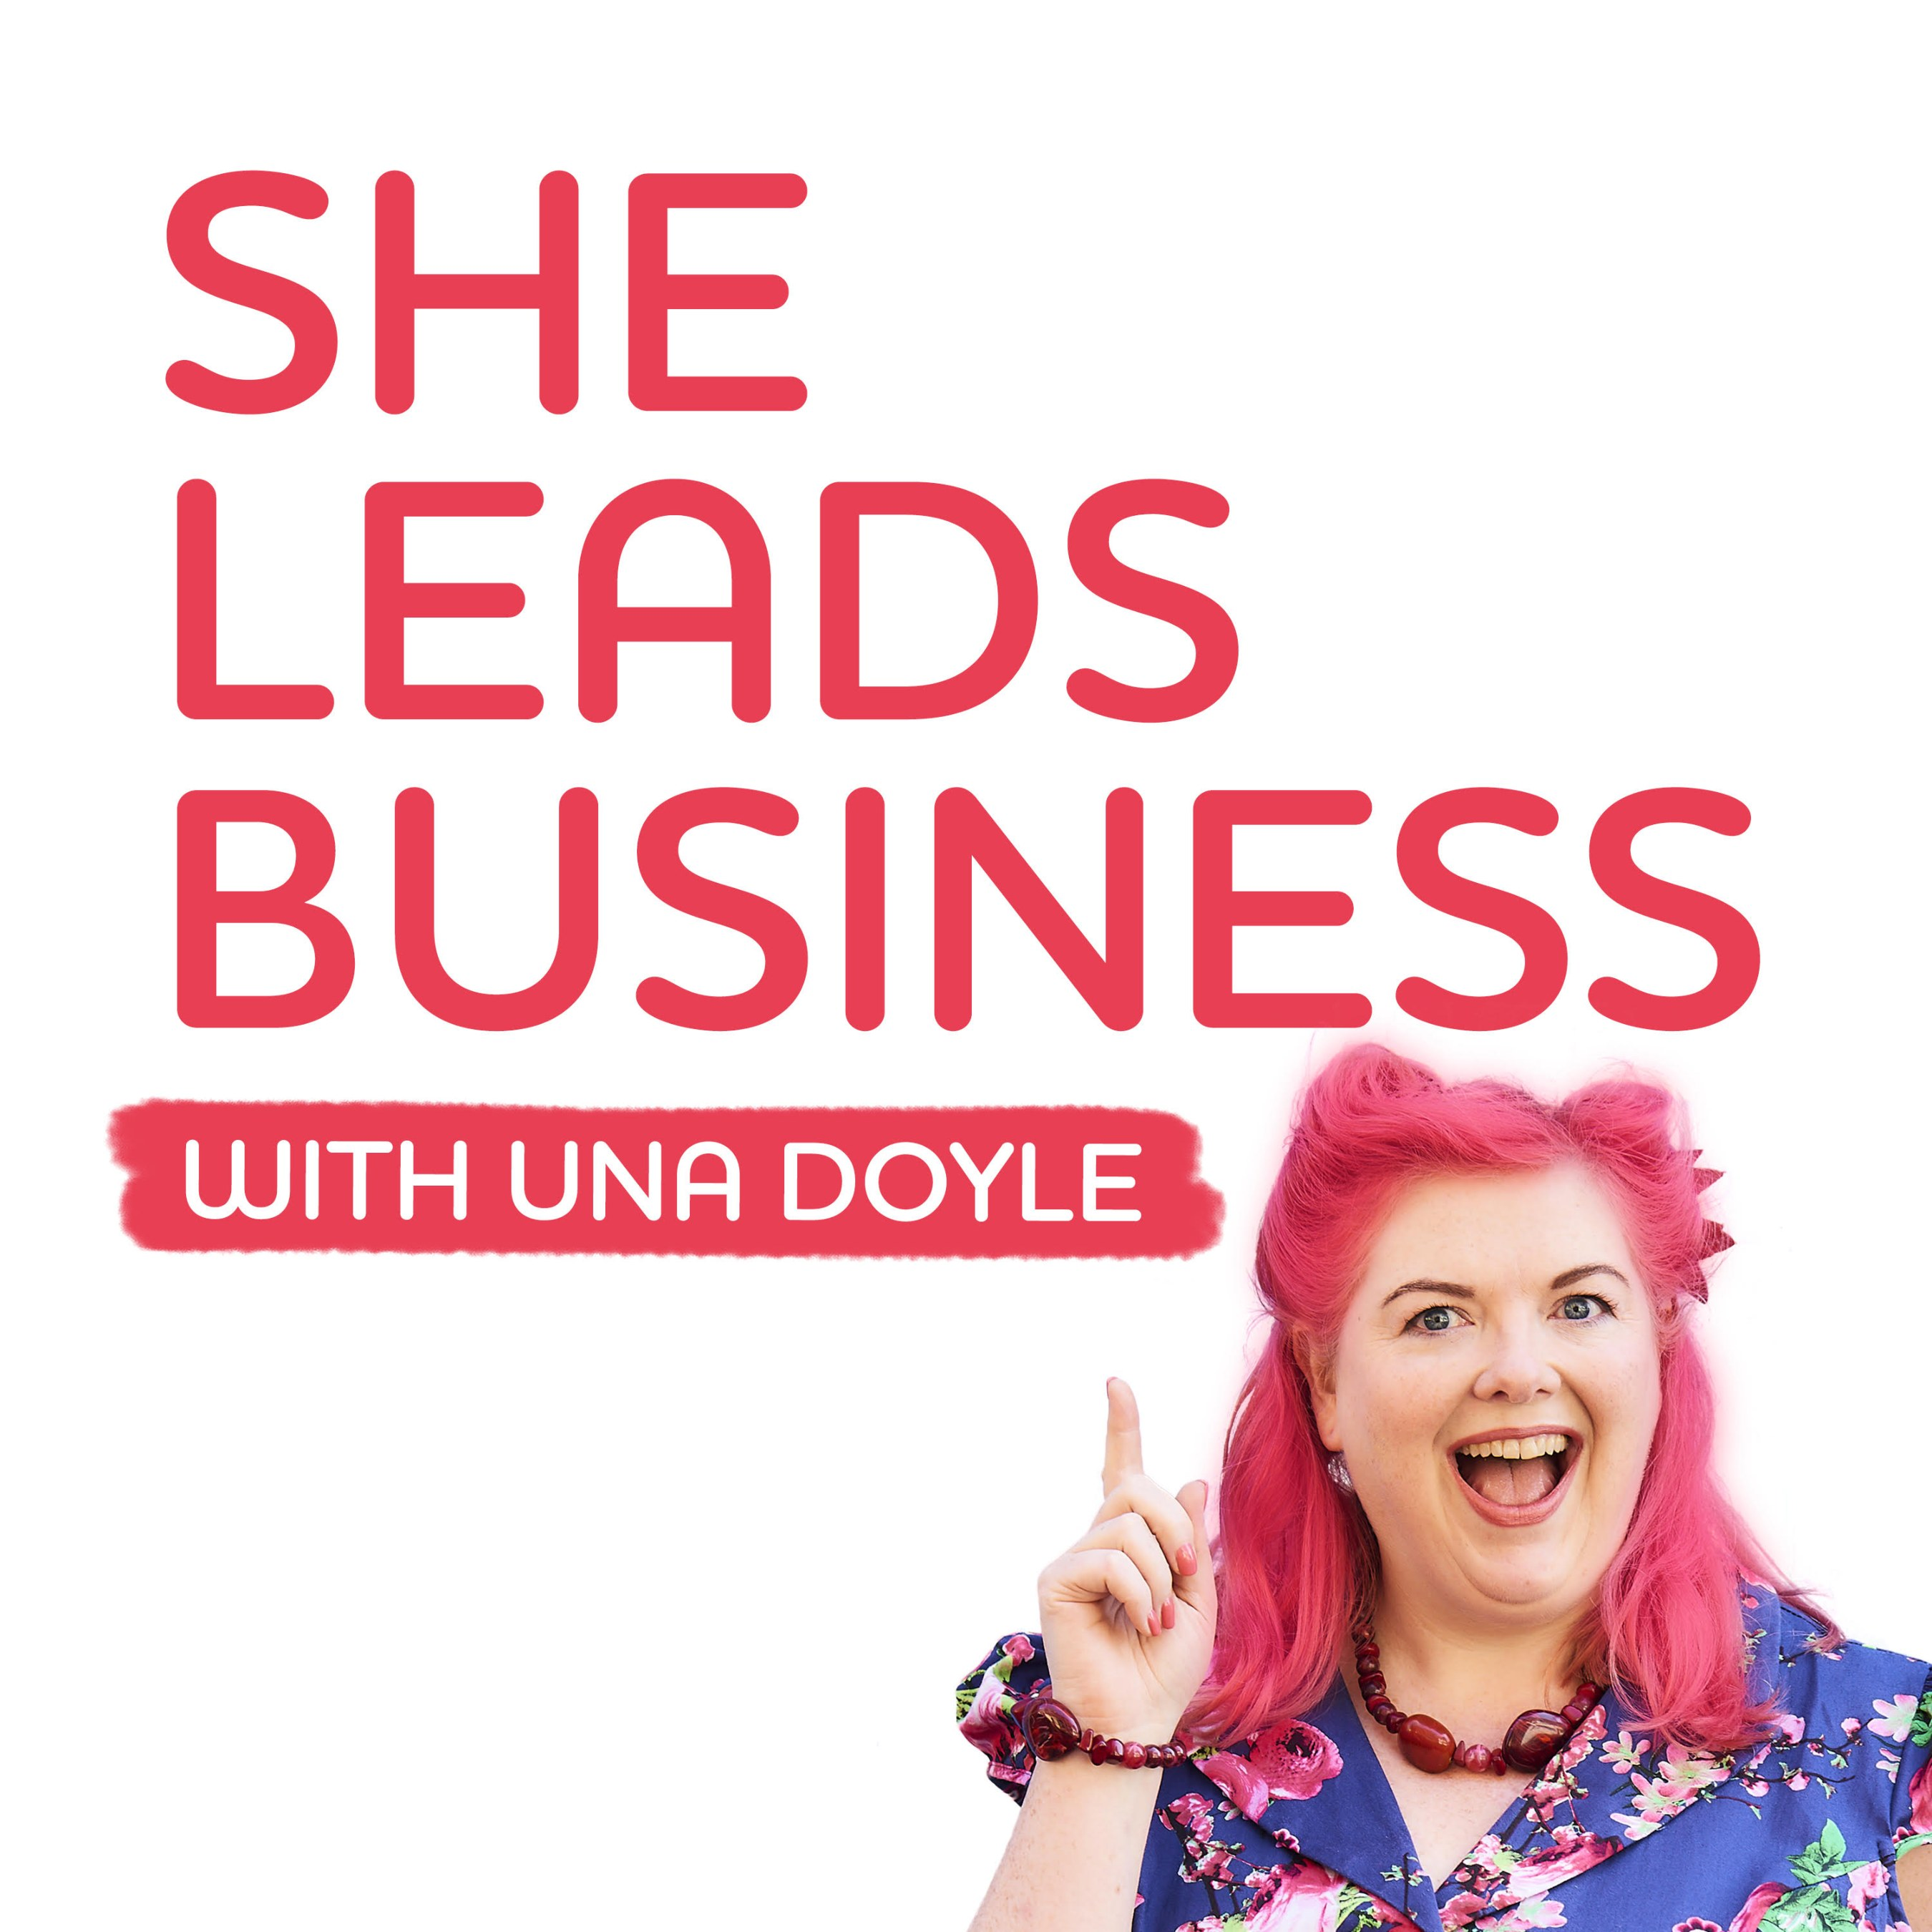 Welcome to the She Leads Business Show!